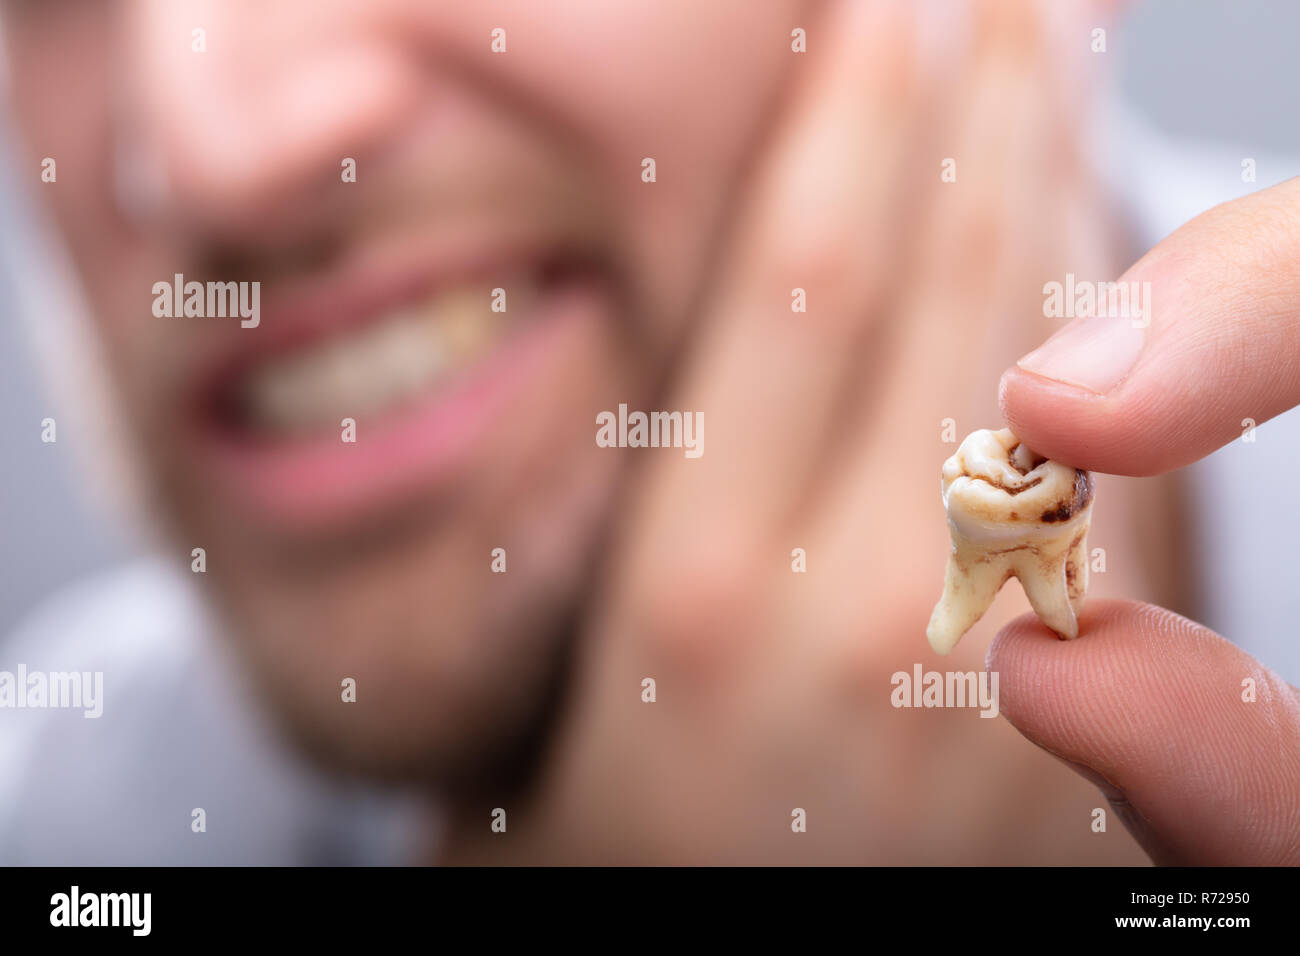 Close-up Of A Man's Hand Holding Decayed Tooth Stock Photo